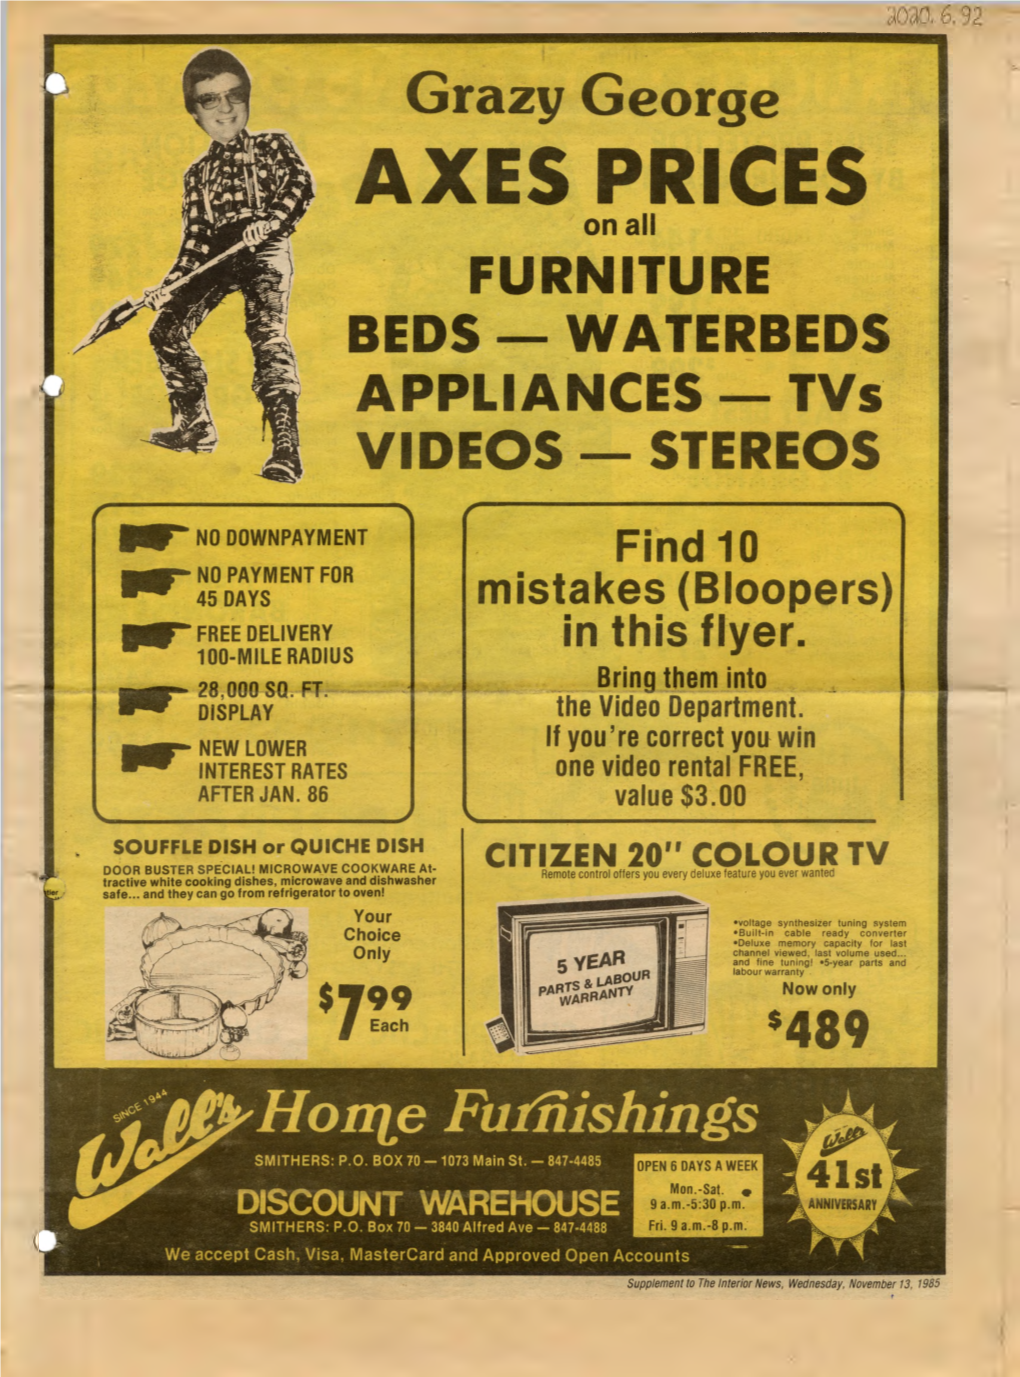 AXES PRICES on All FURNITURE BEDS — WATERBEDS APPLIANCES — Tvs VIDEOS — STEREOS